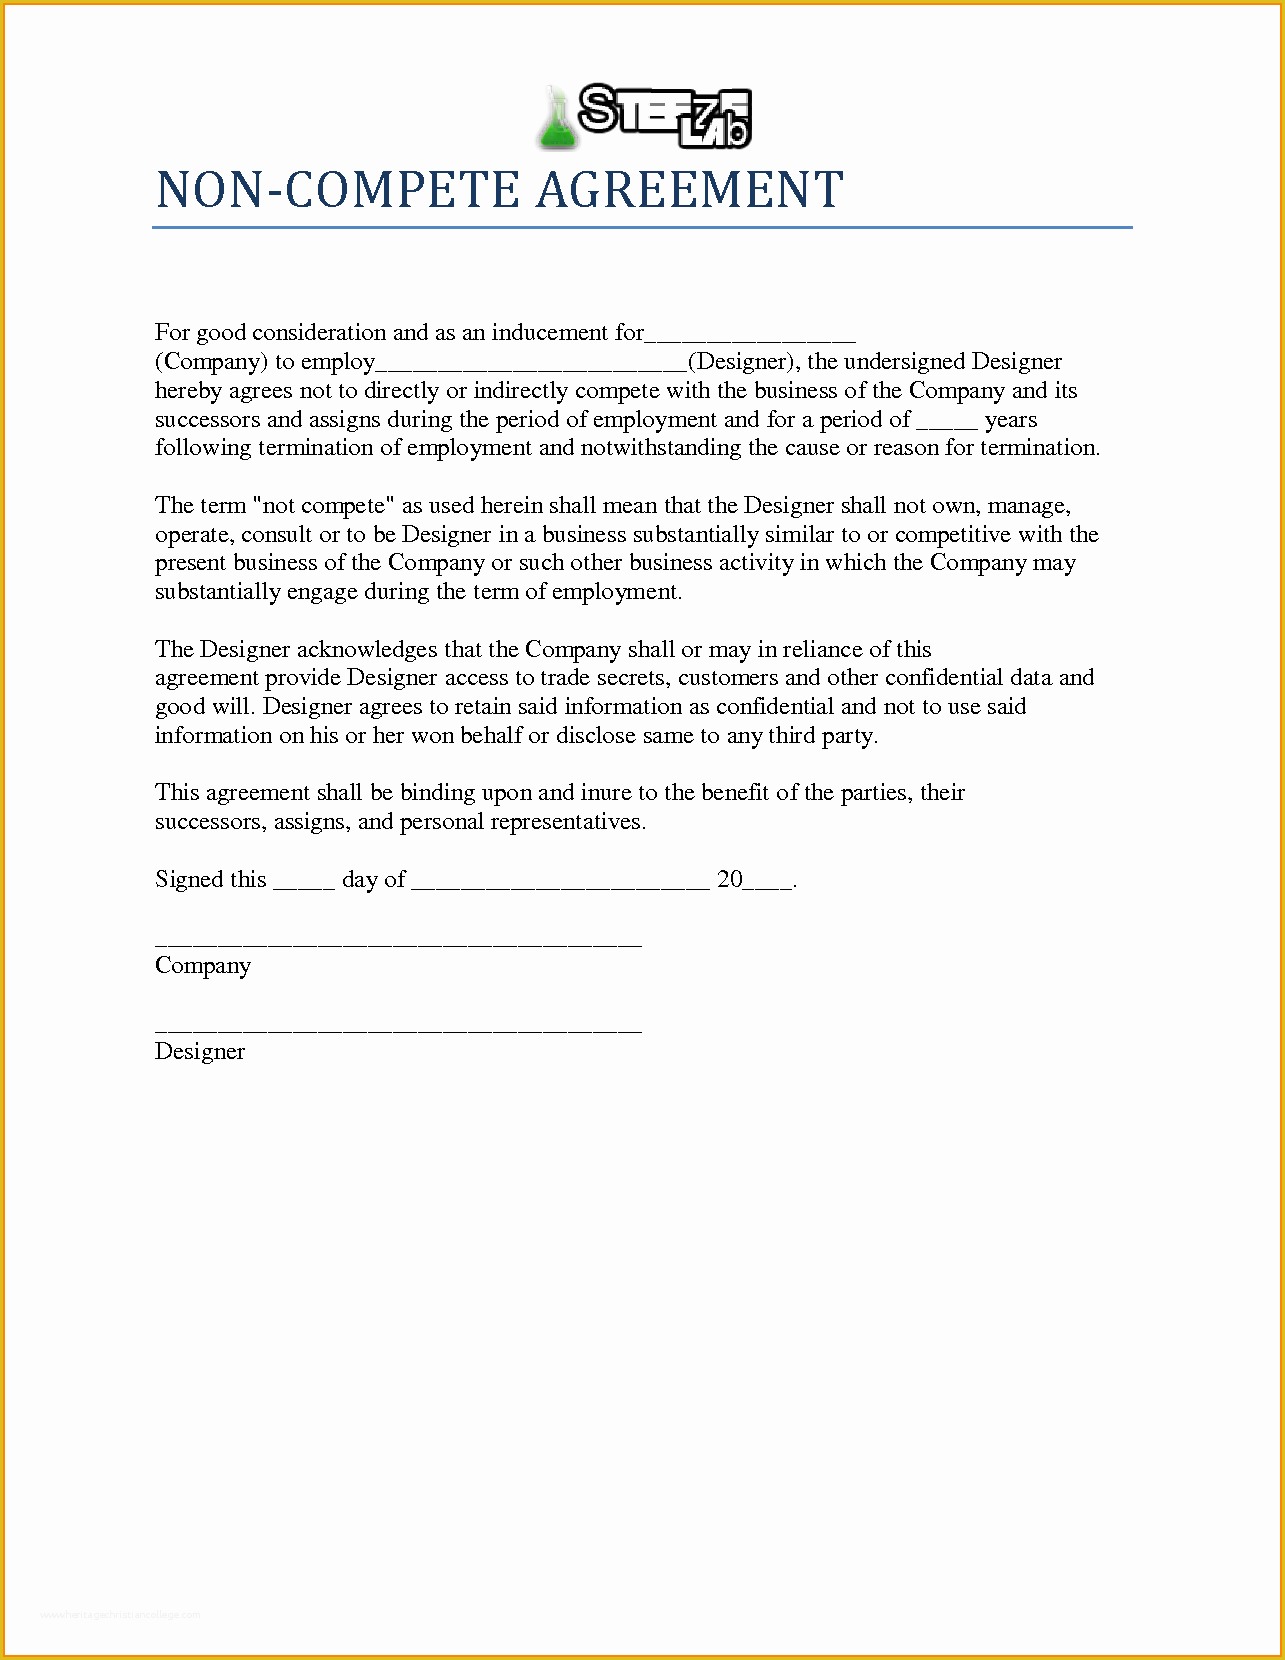 Non Compete Template Free Of Agreement Non Pete Agreement form